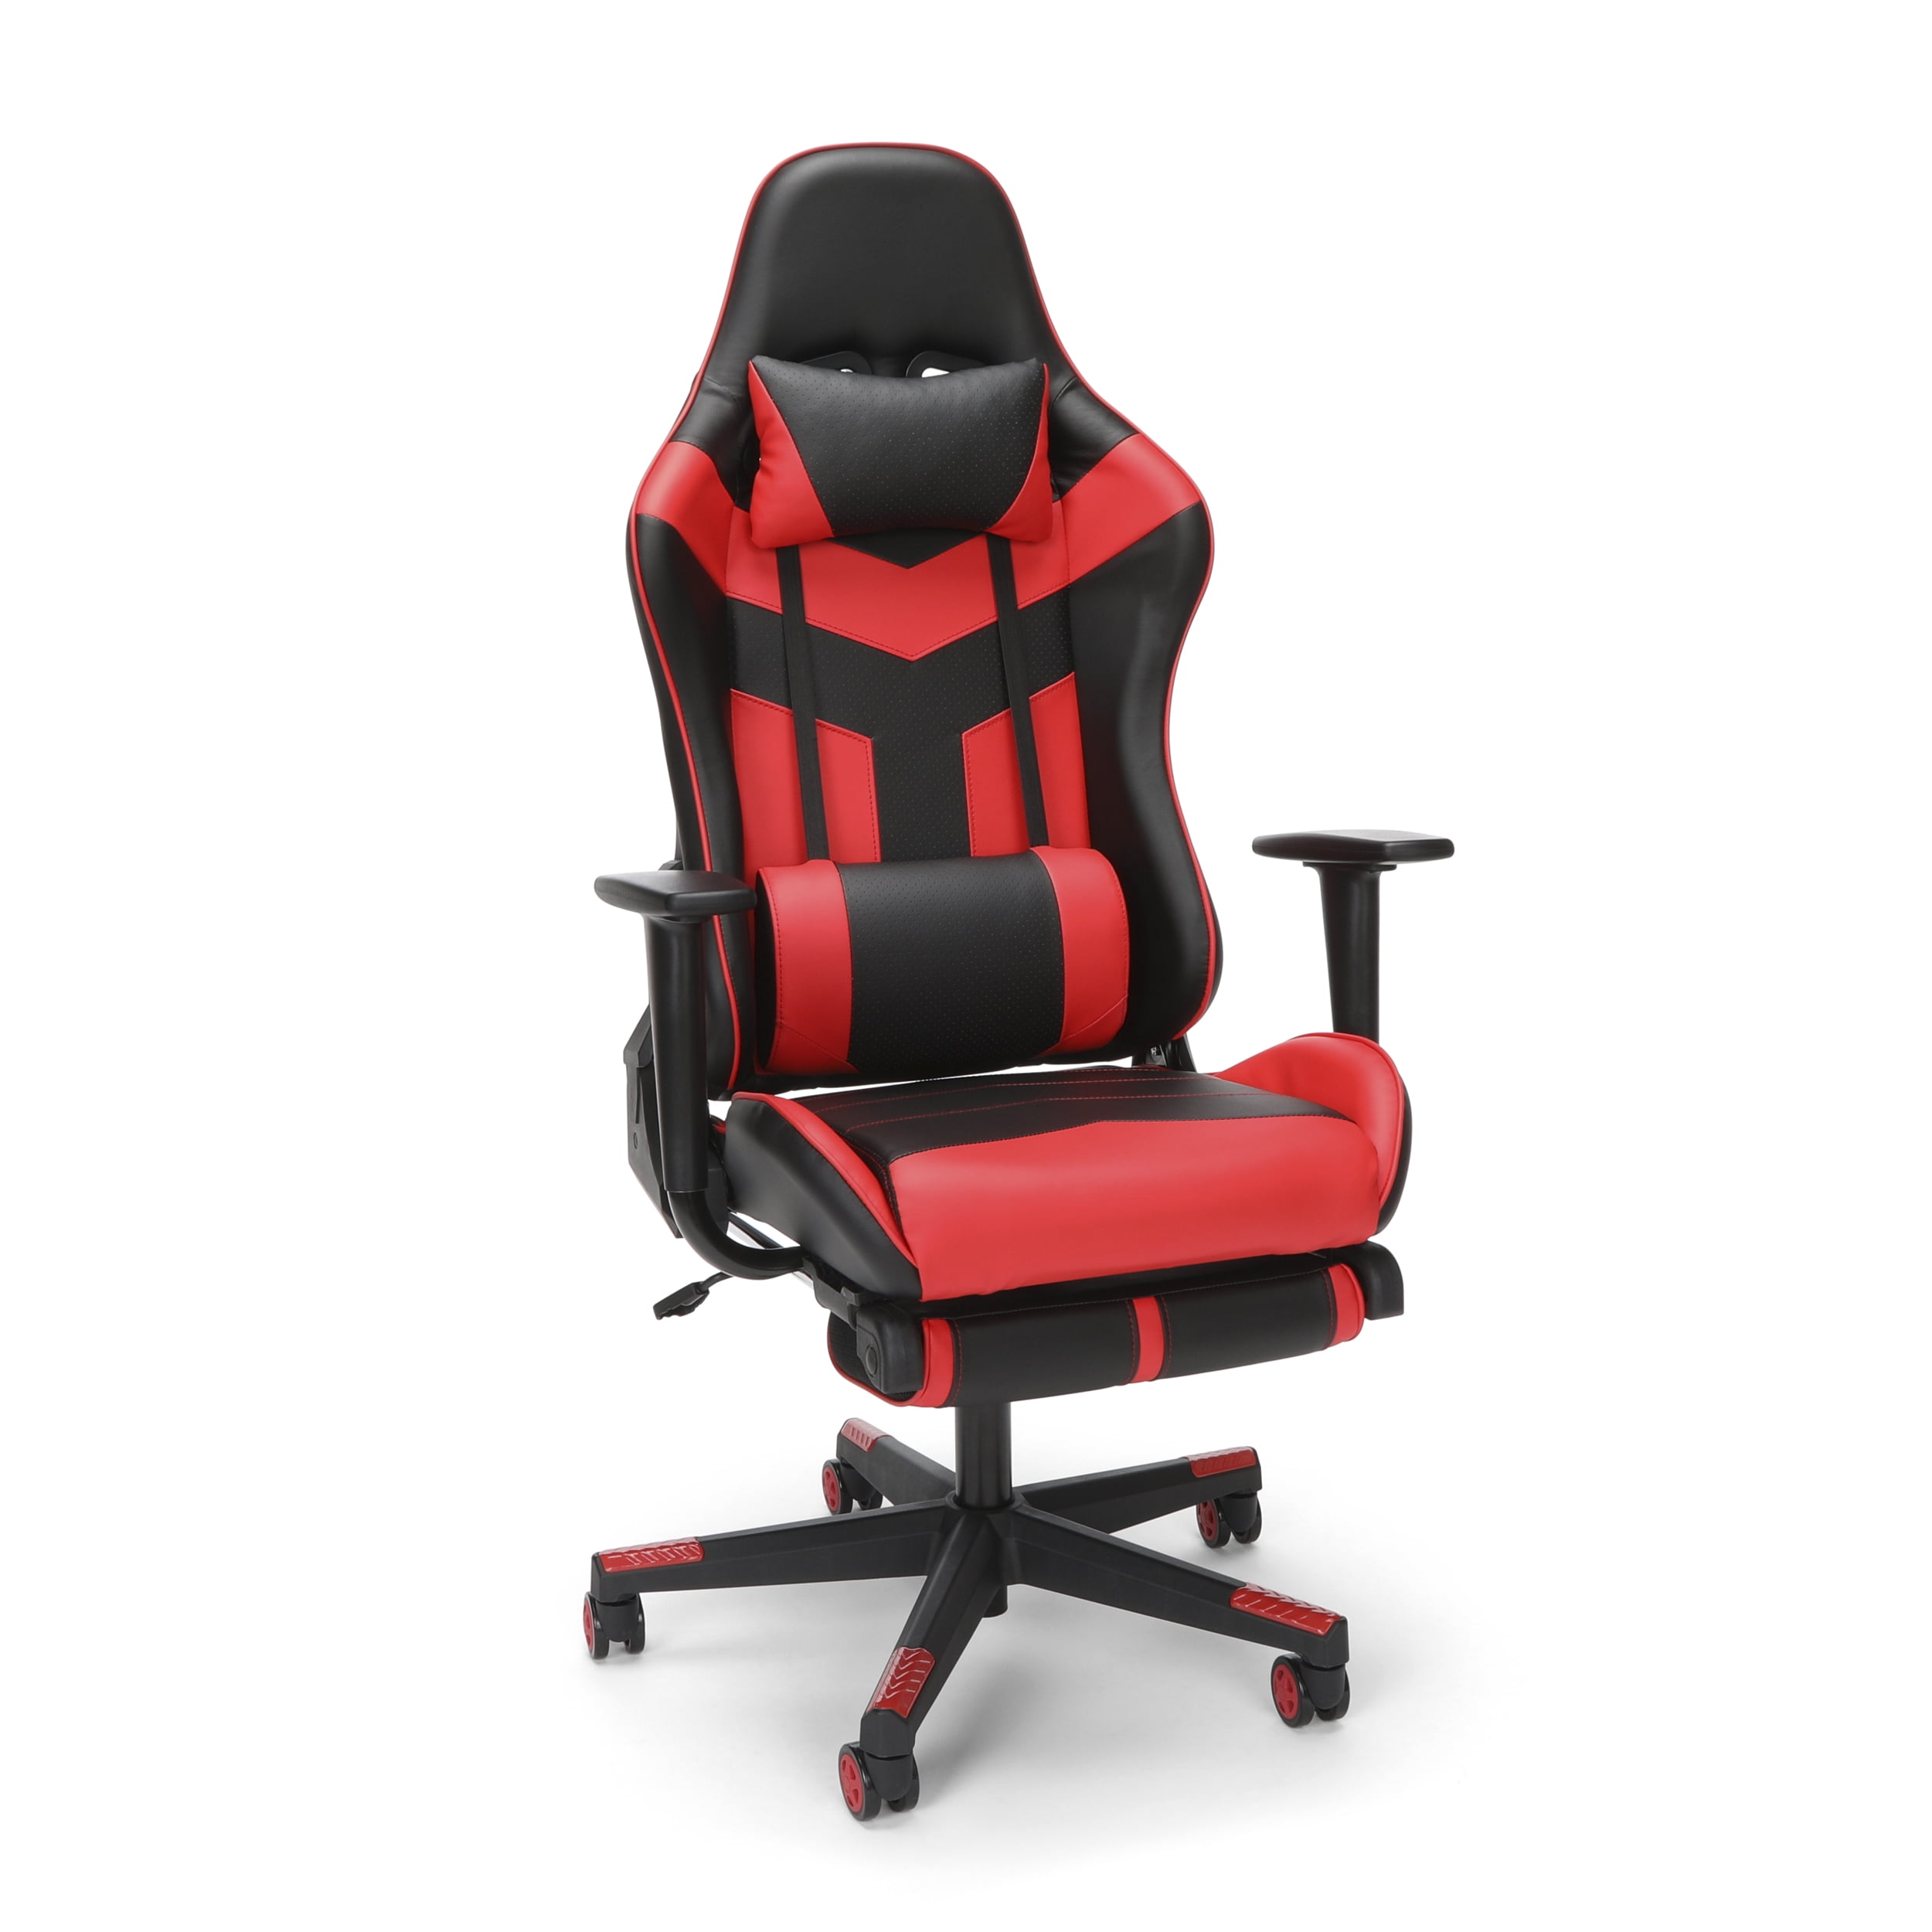 image./dg7-teFHqINiwcVD/video-game-chairs